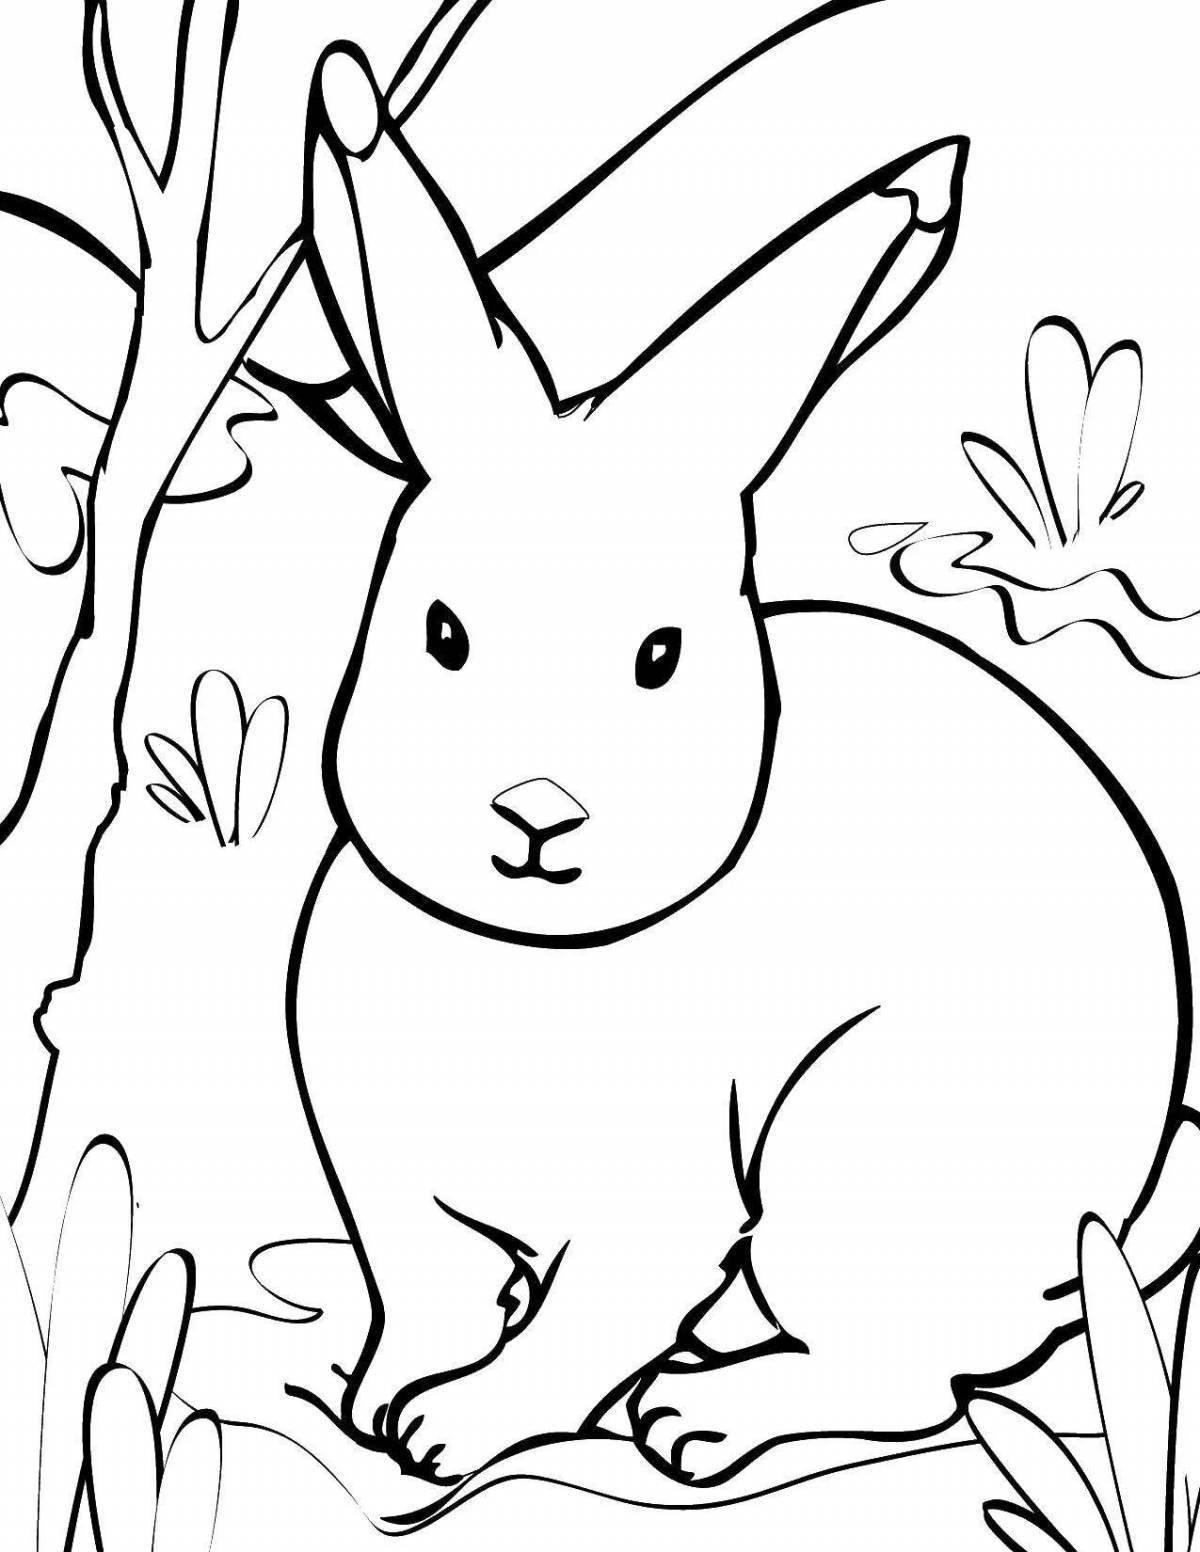 Adorable forest animals coloring page